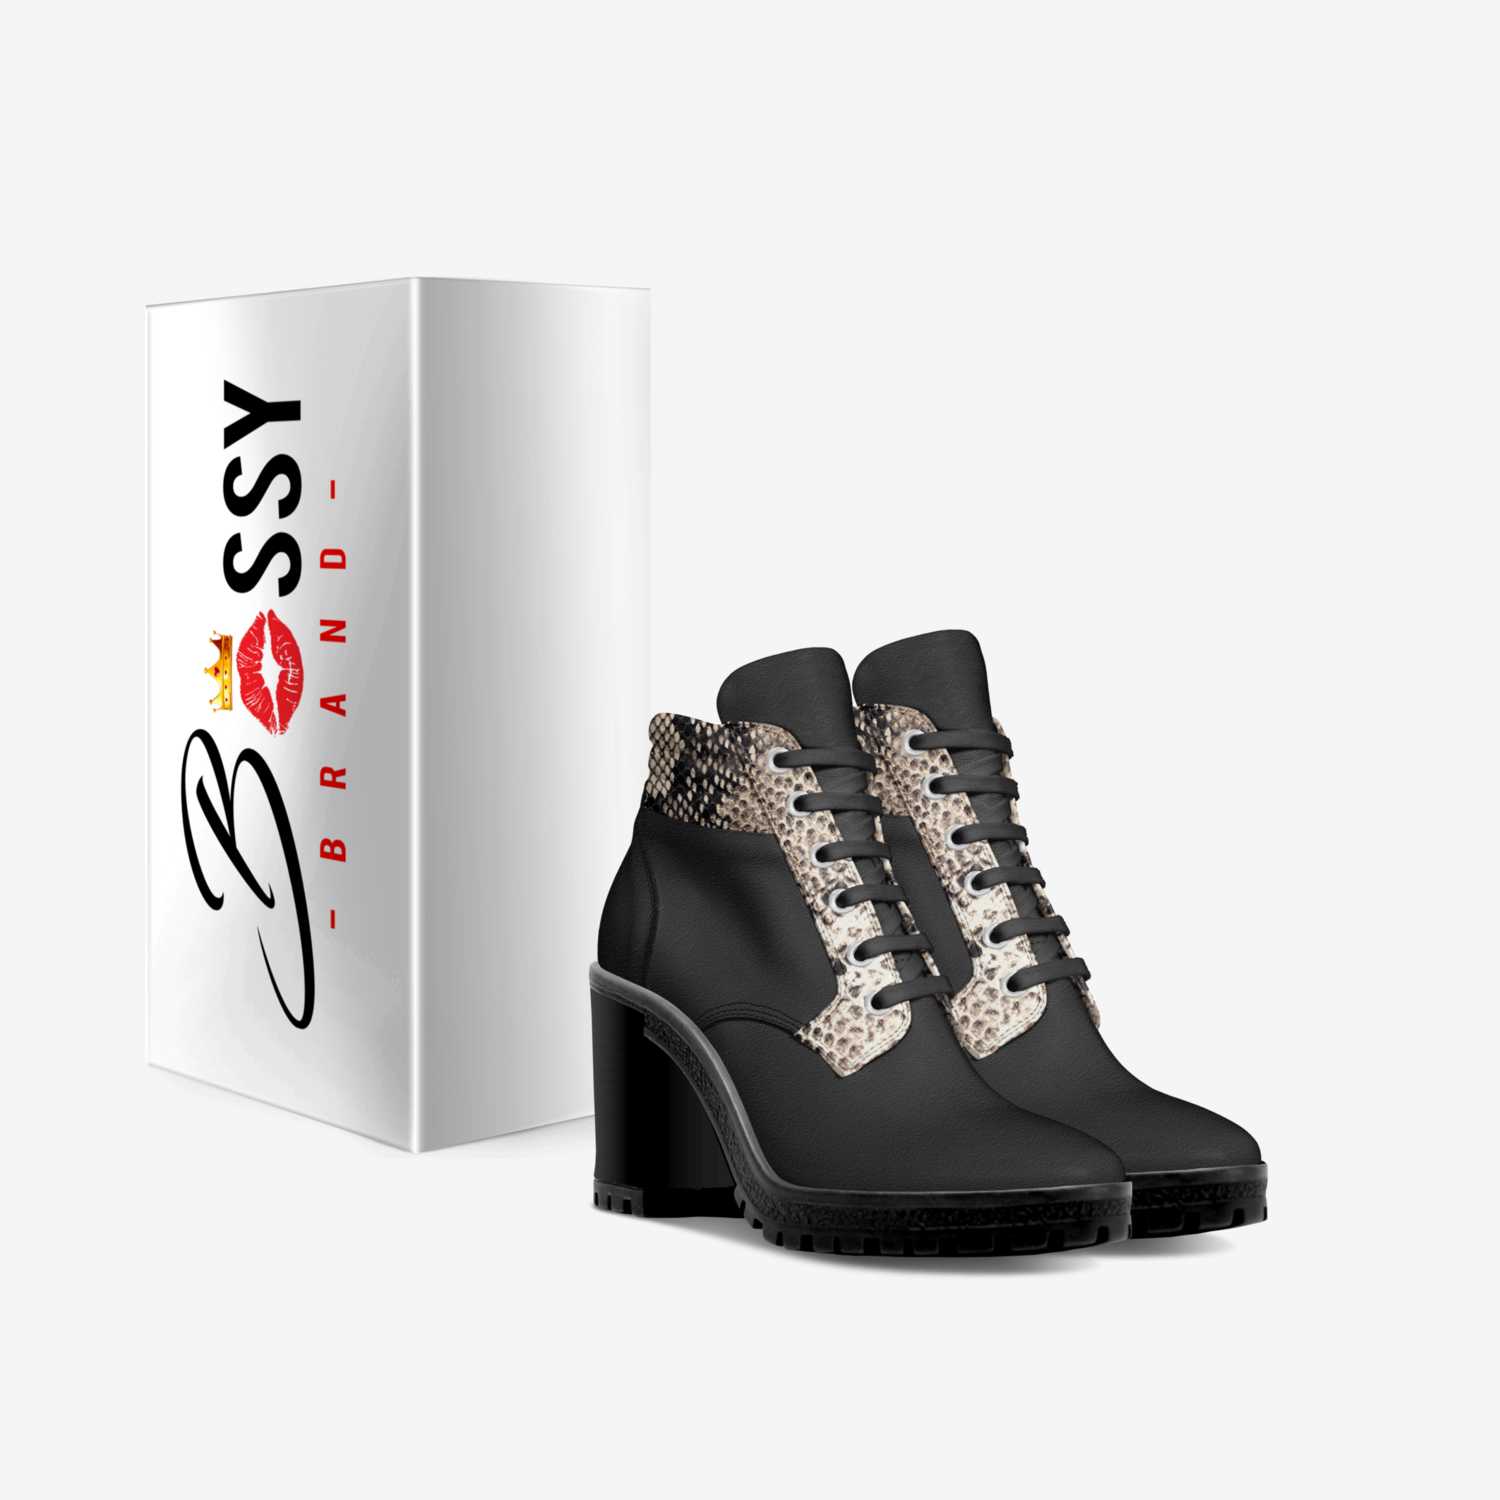 B.O.S.S.Y. brand custom made in Italy shoes by Mika Campbell | Box view